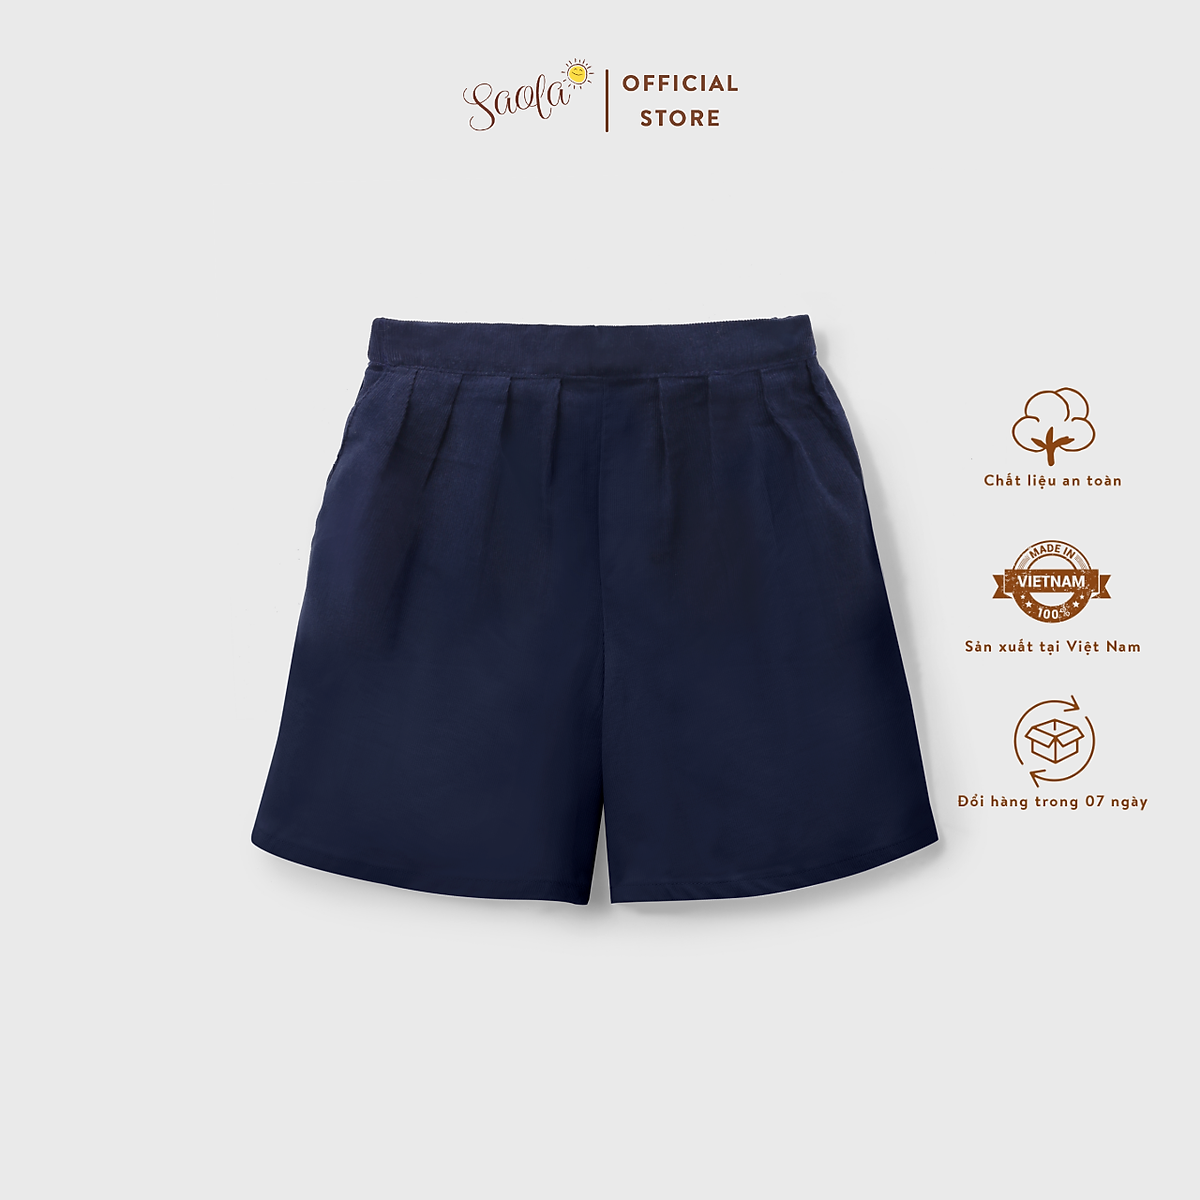 13 Different Types of Shorts for Boys (Kids) - VerbNow